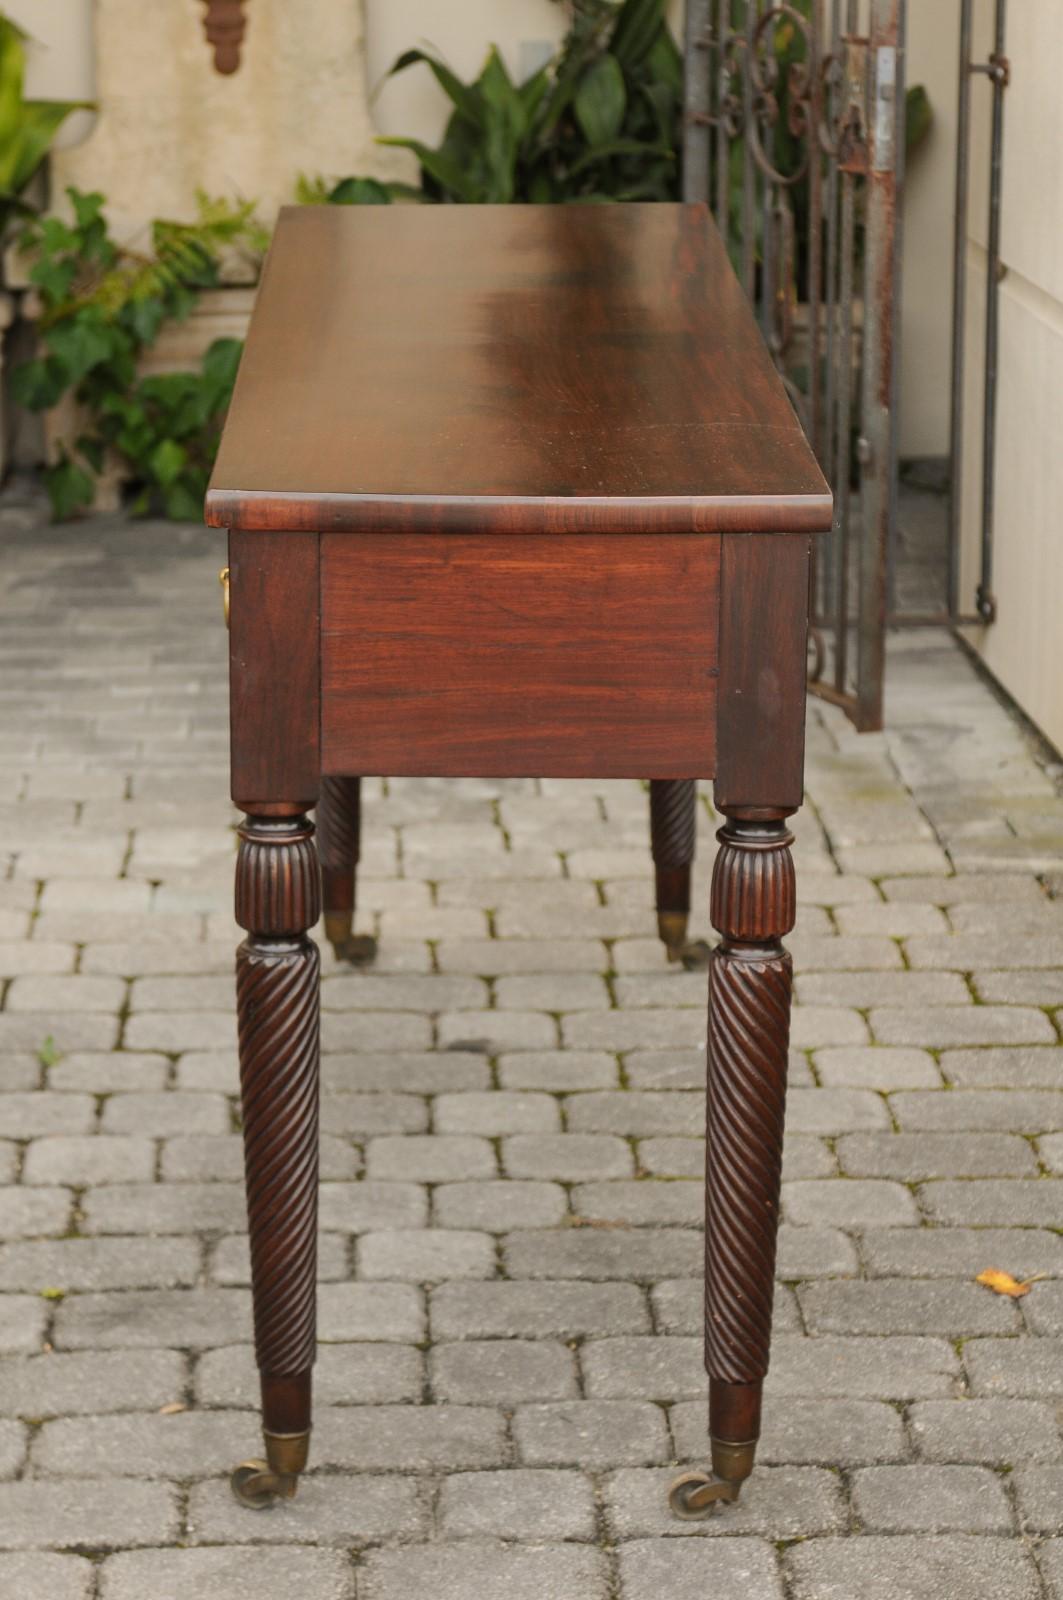 Anglo-Indian 1850s Mahogany Server with Drawers and Twisted Legs on Casters 6